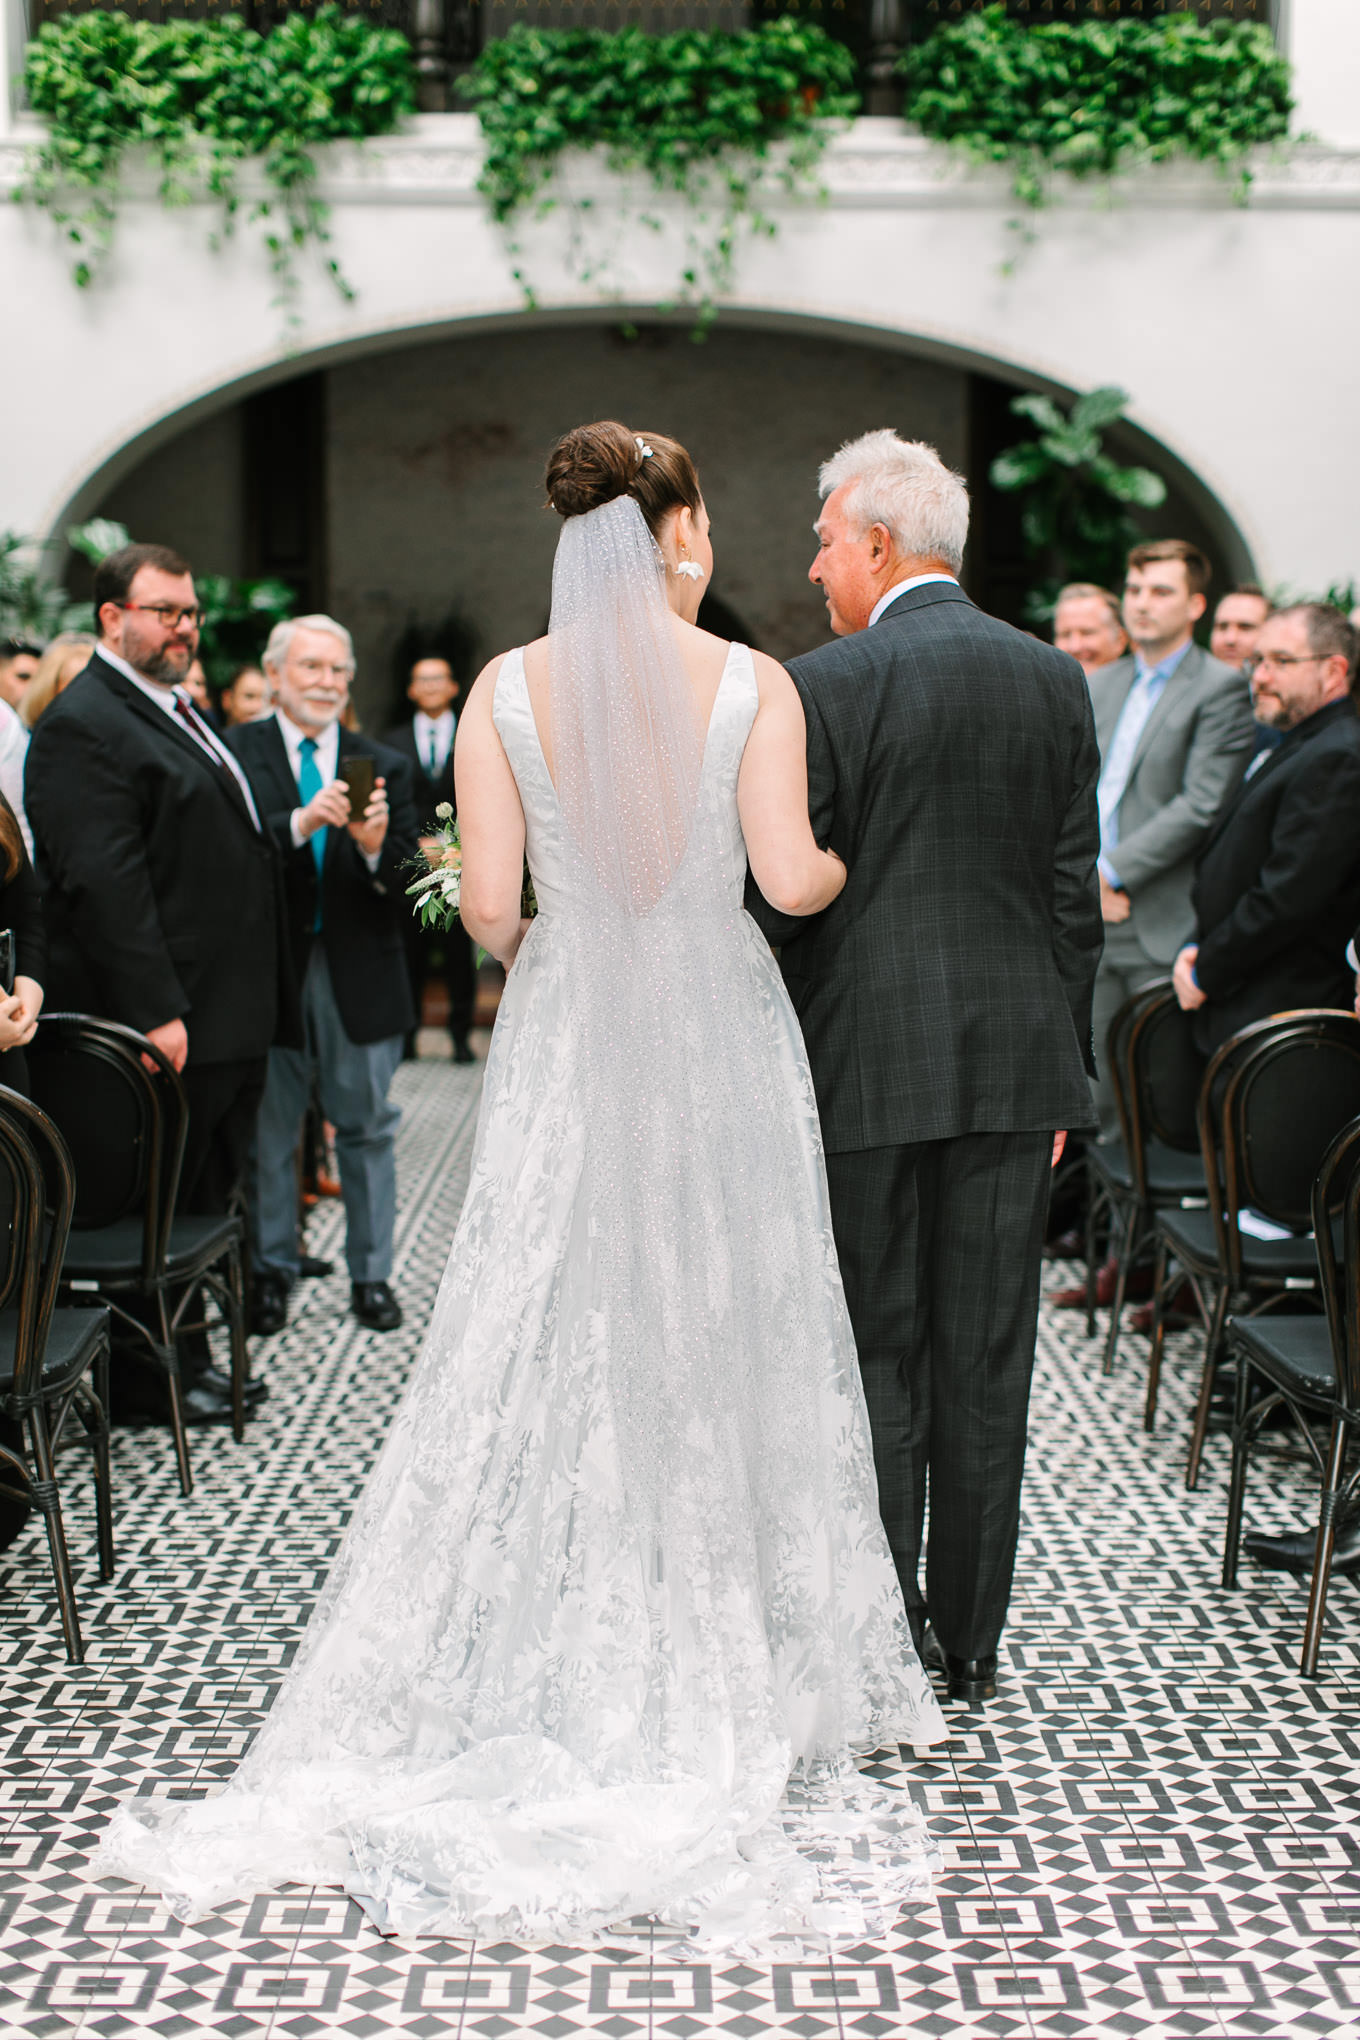 Ebell of Long Beach wedding | Wedding and elopement photography roundup | Los Angeles and Palm Springs photographer | #losangeleswedding #palmspringswedding #elopementphotographer Source: Mary Costa Photography | Los Angeles